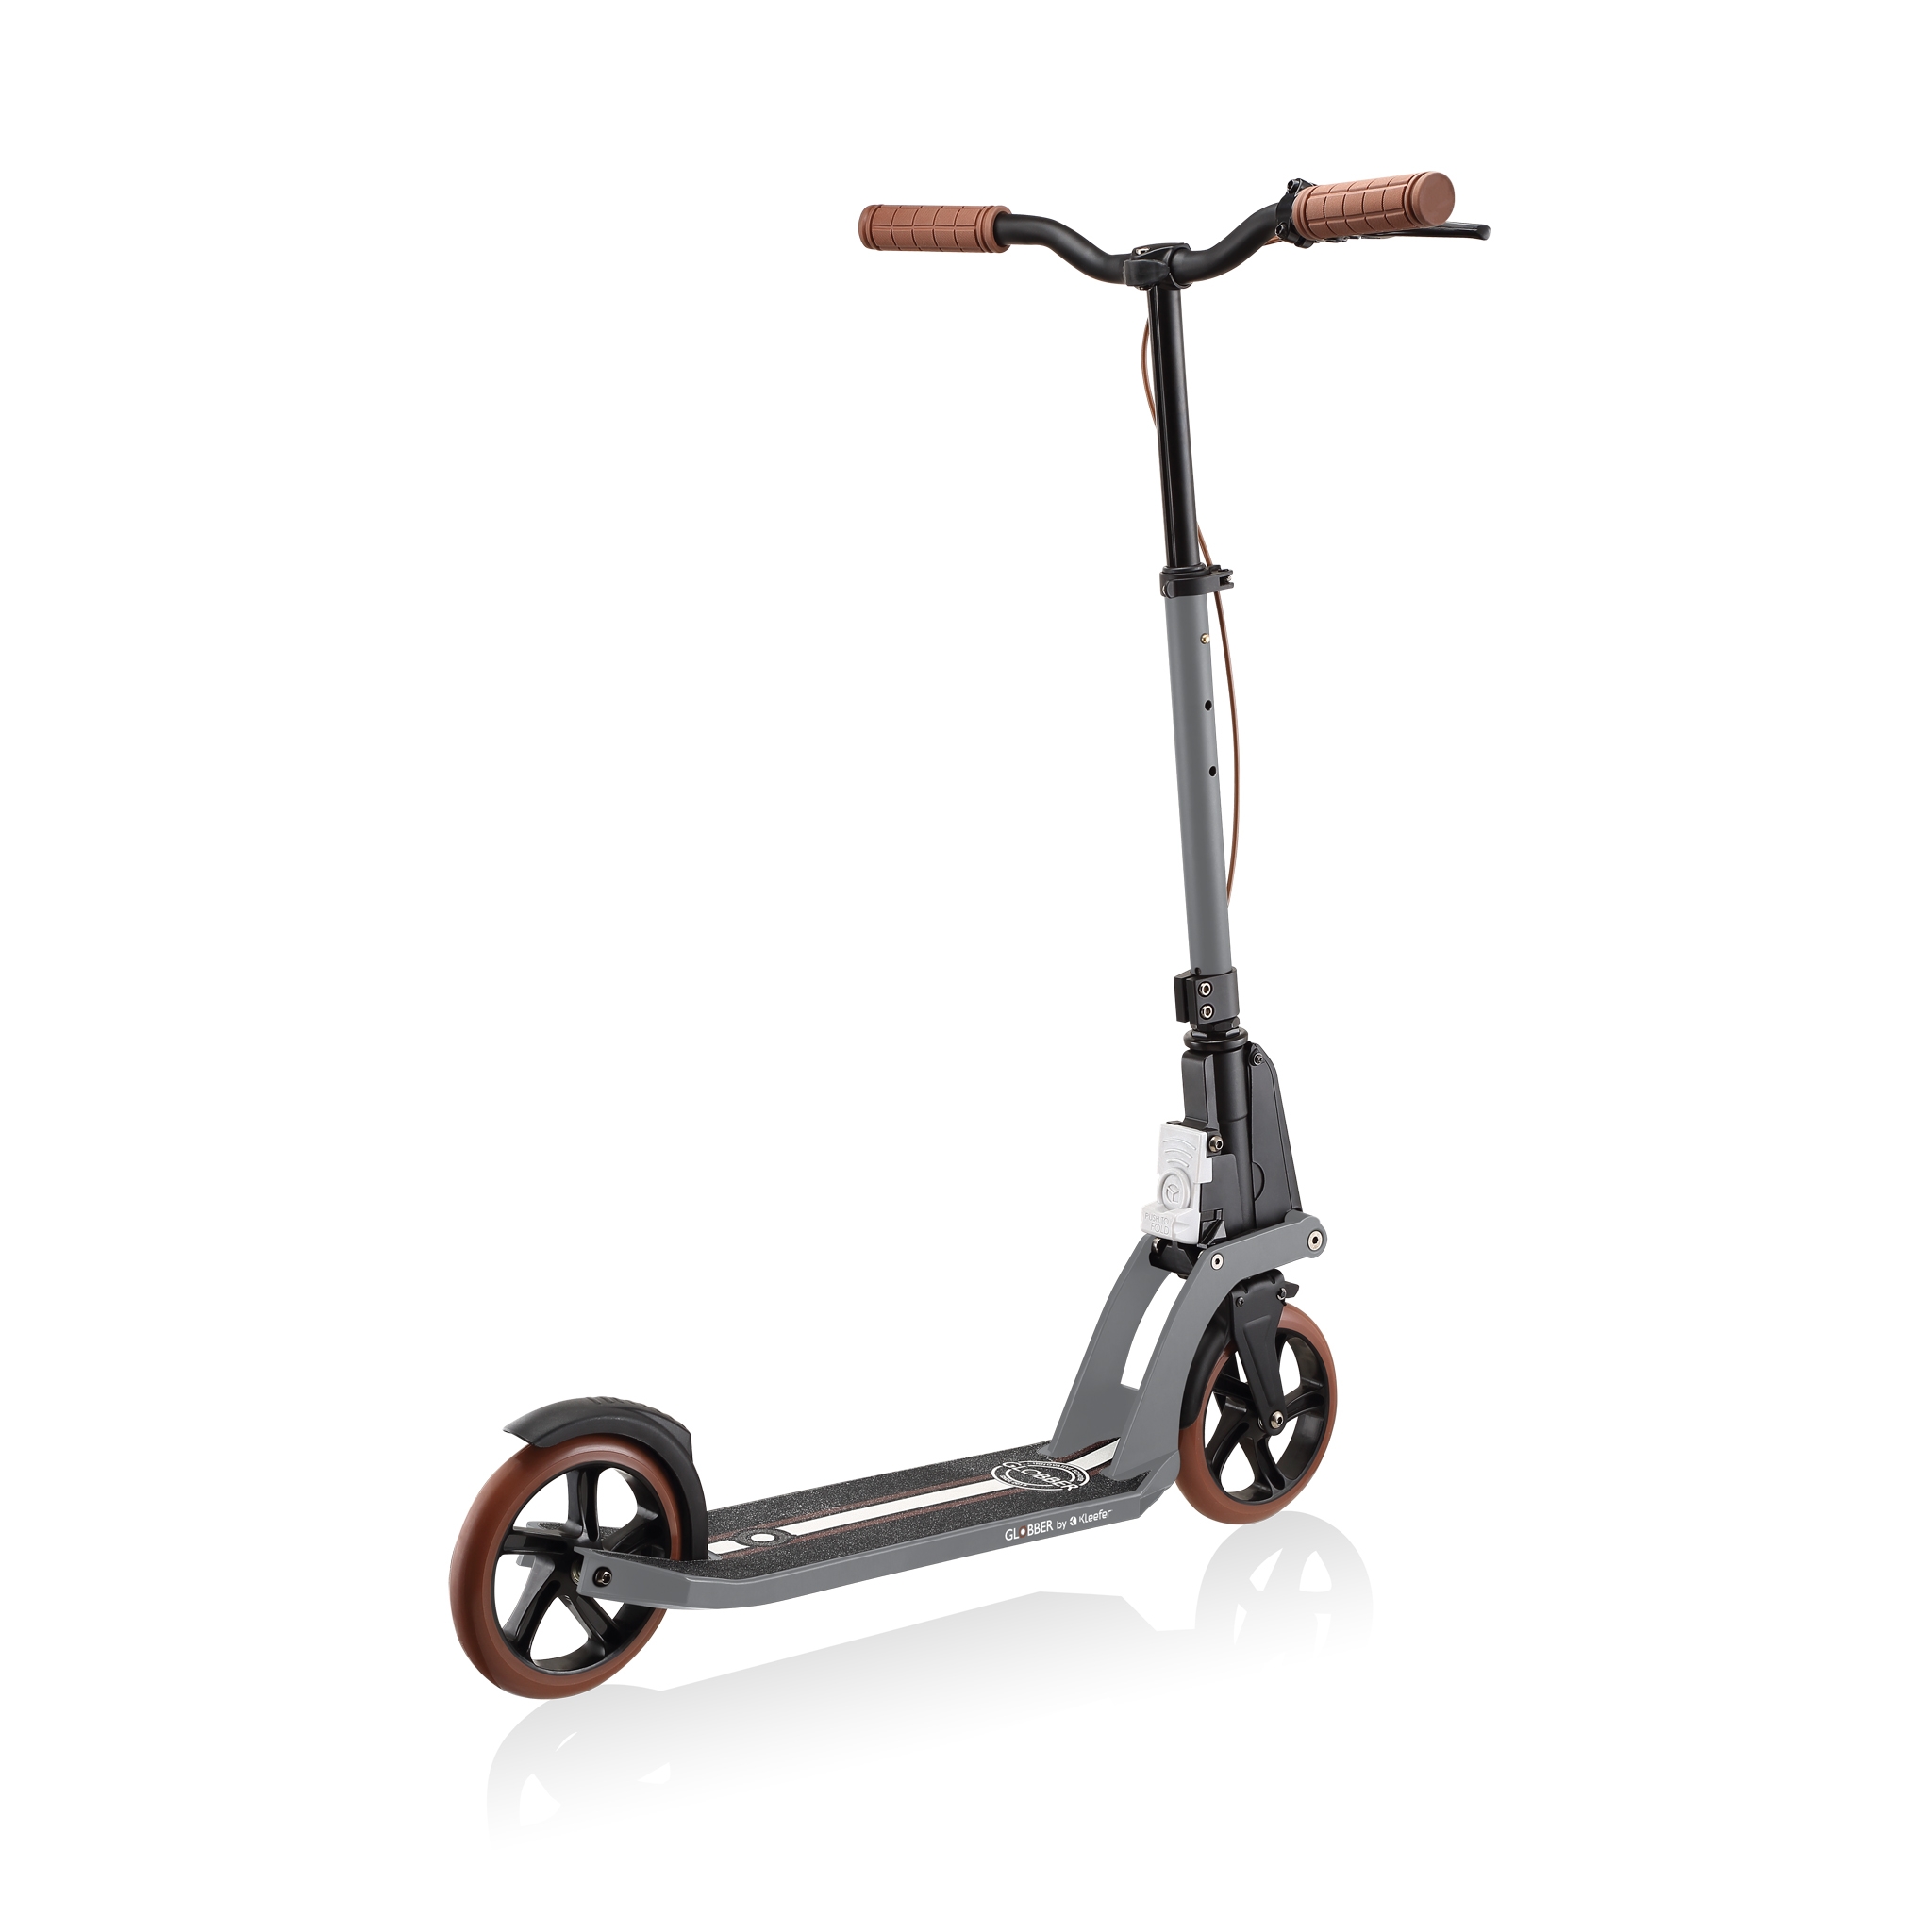 ONE-K-180-PISTON-DELUXE-extra-safe-foldable-kick-scooter-for-adults-with-2-brakes 4